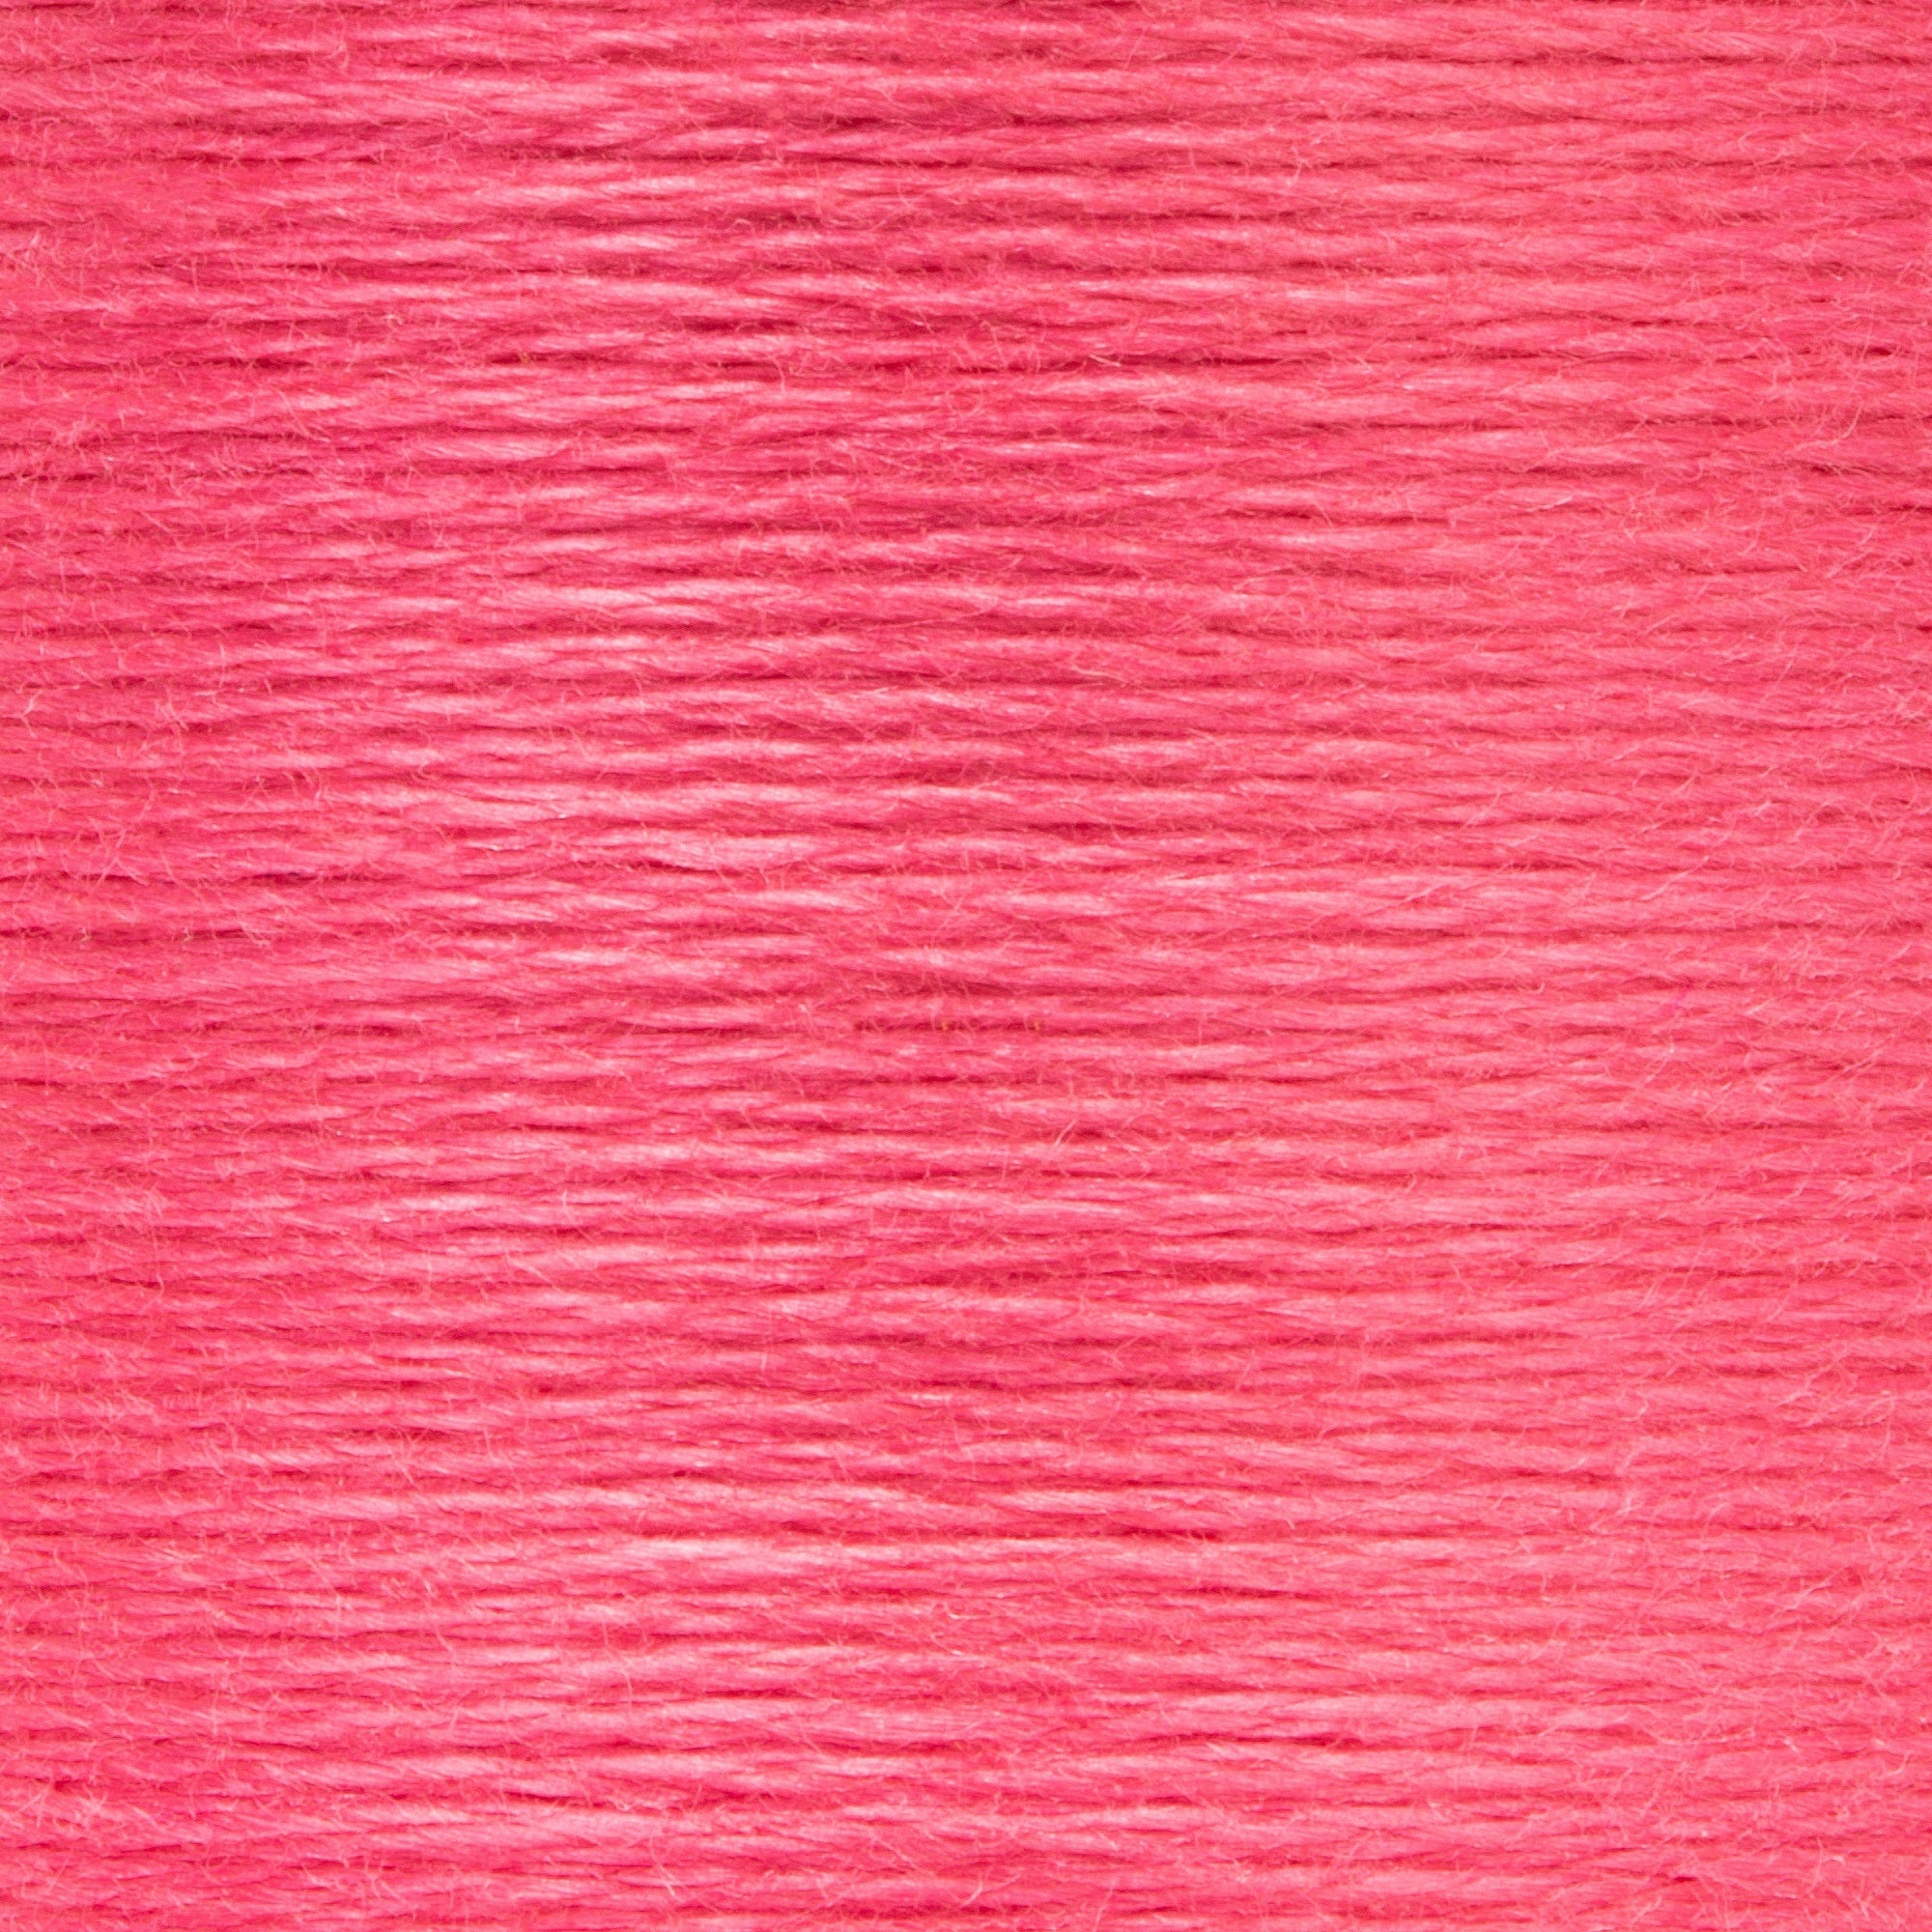 Anchor Embroidery Floss in Carmine Rose Lt